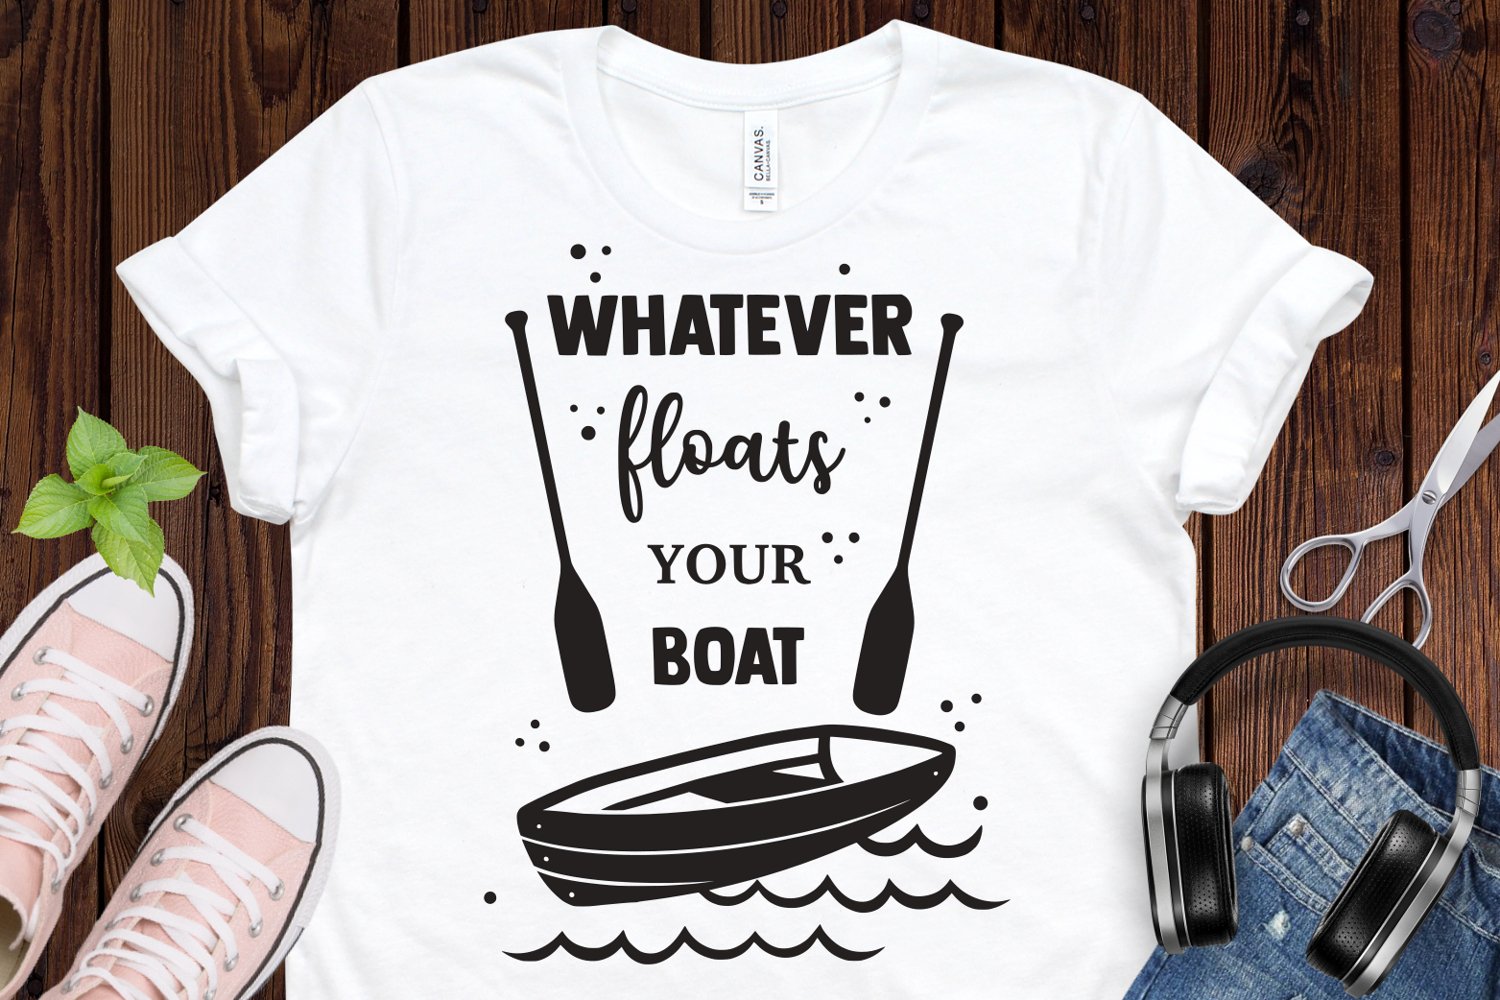 Blue t-shirt with beautiful boat elements design.